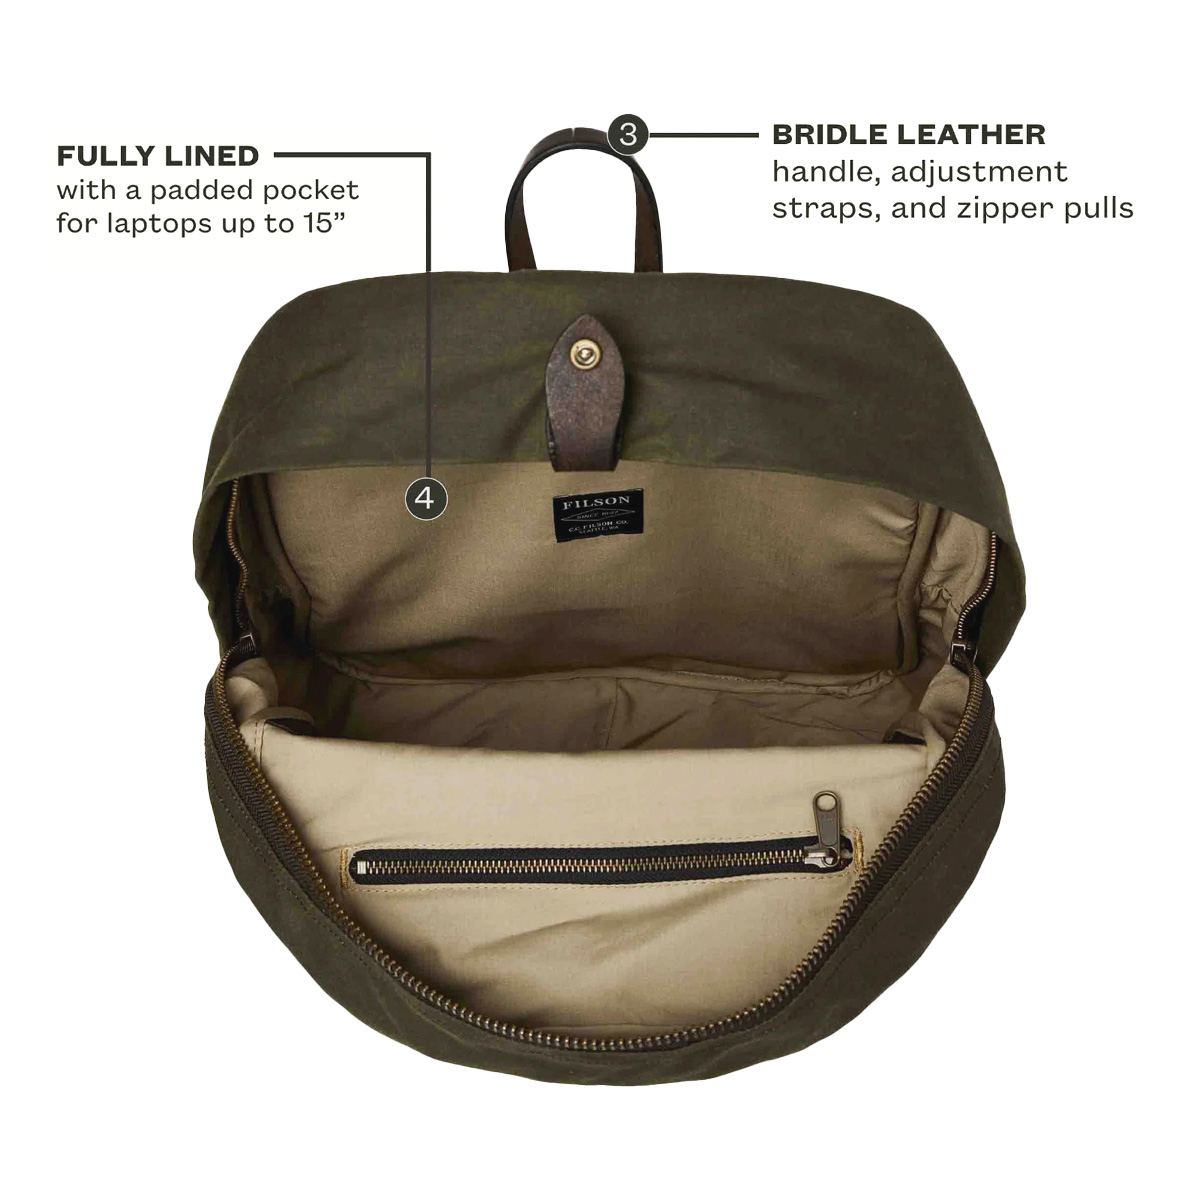 Filson Journeyman Backpack 20231638 Otter Green, fully lined with a protected compartment for your laptop